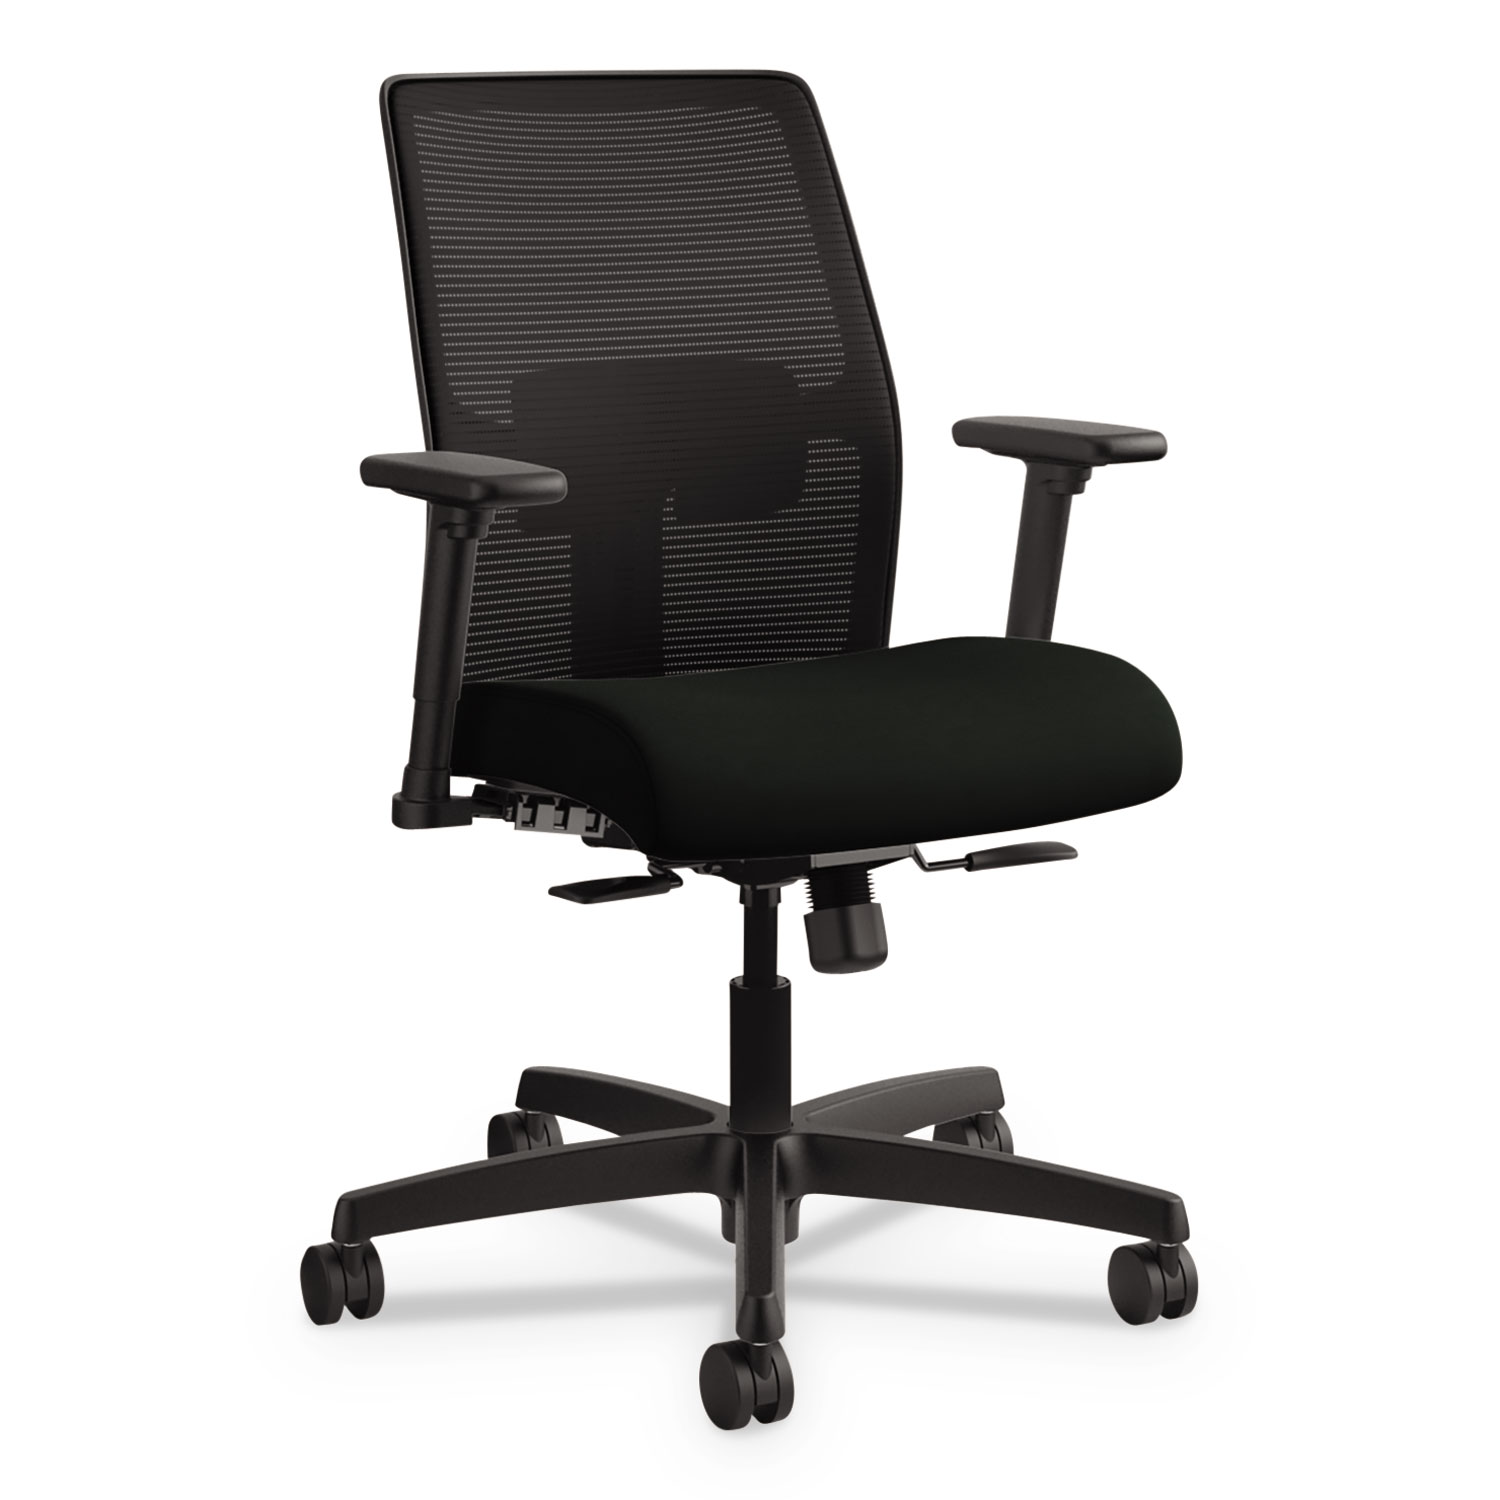 Ignition 2.0 4-Way Stretch Low-Back Mesh Task Chair, Supports up to 300 lbs, Black Seat/Back, Black Base